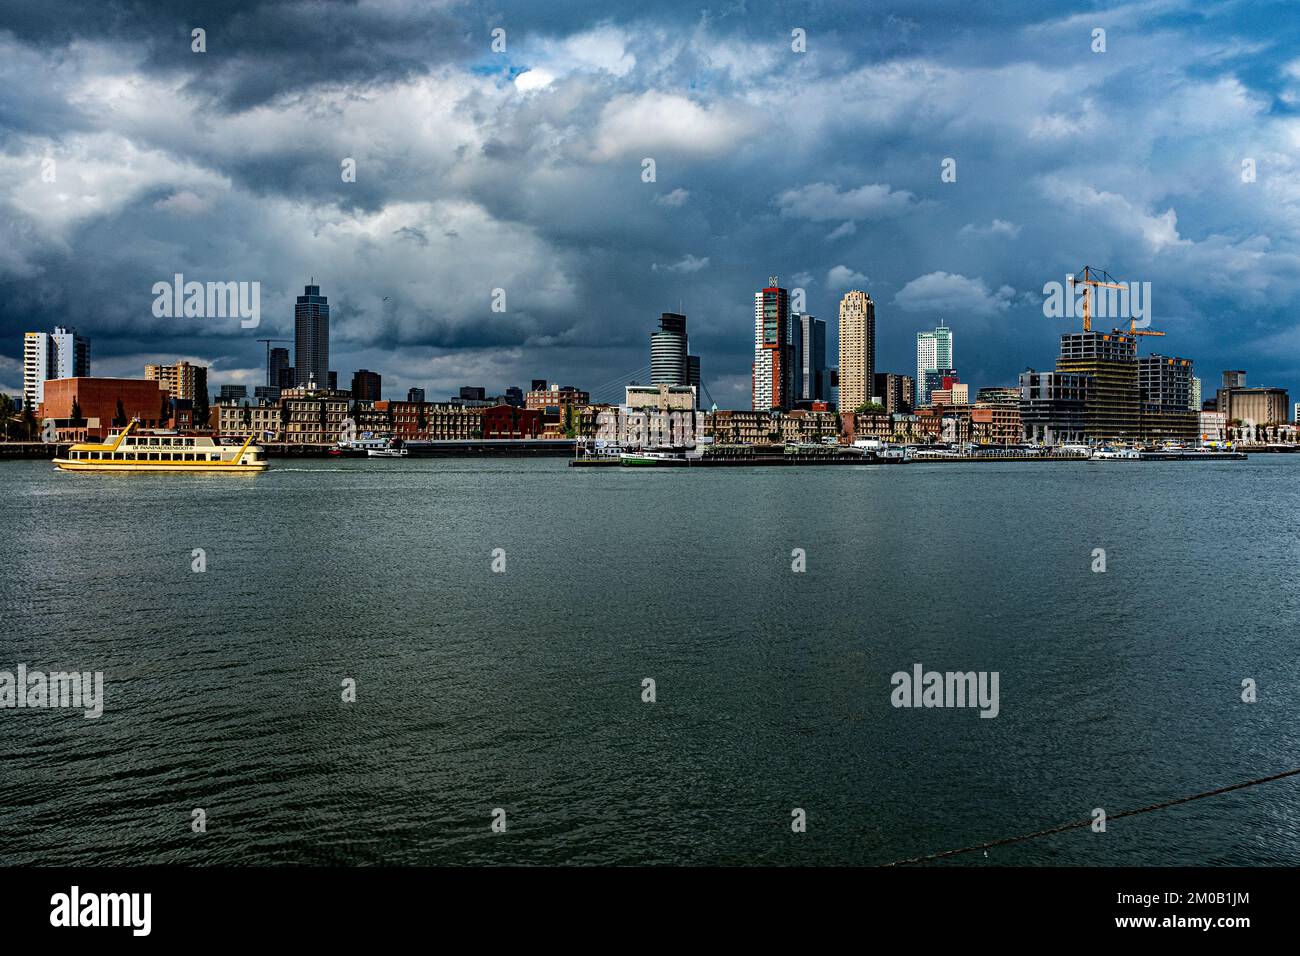 Rotterdam, Netherlands. Skyline of Katendrecht Harbour Island and Docks, now subject of large scale gentrification. Stock Photo